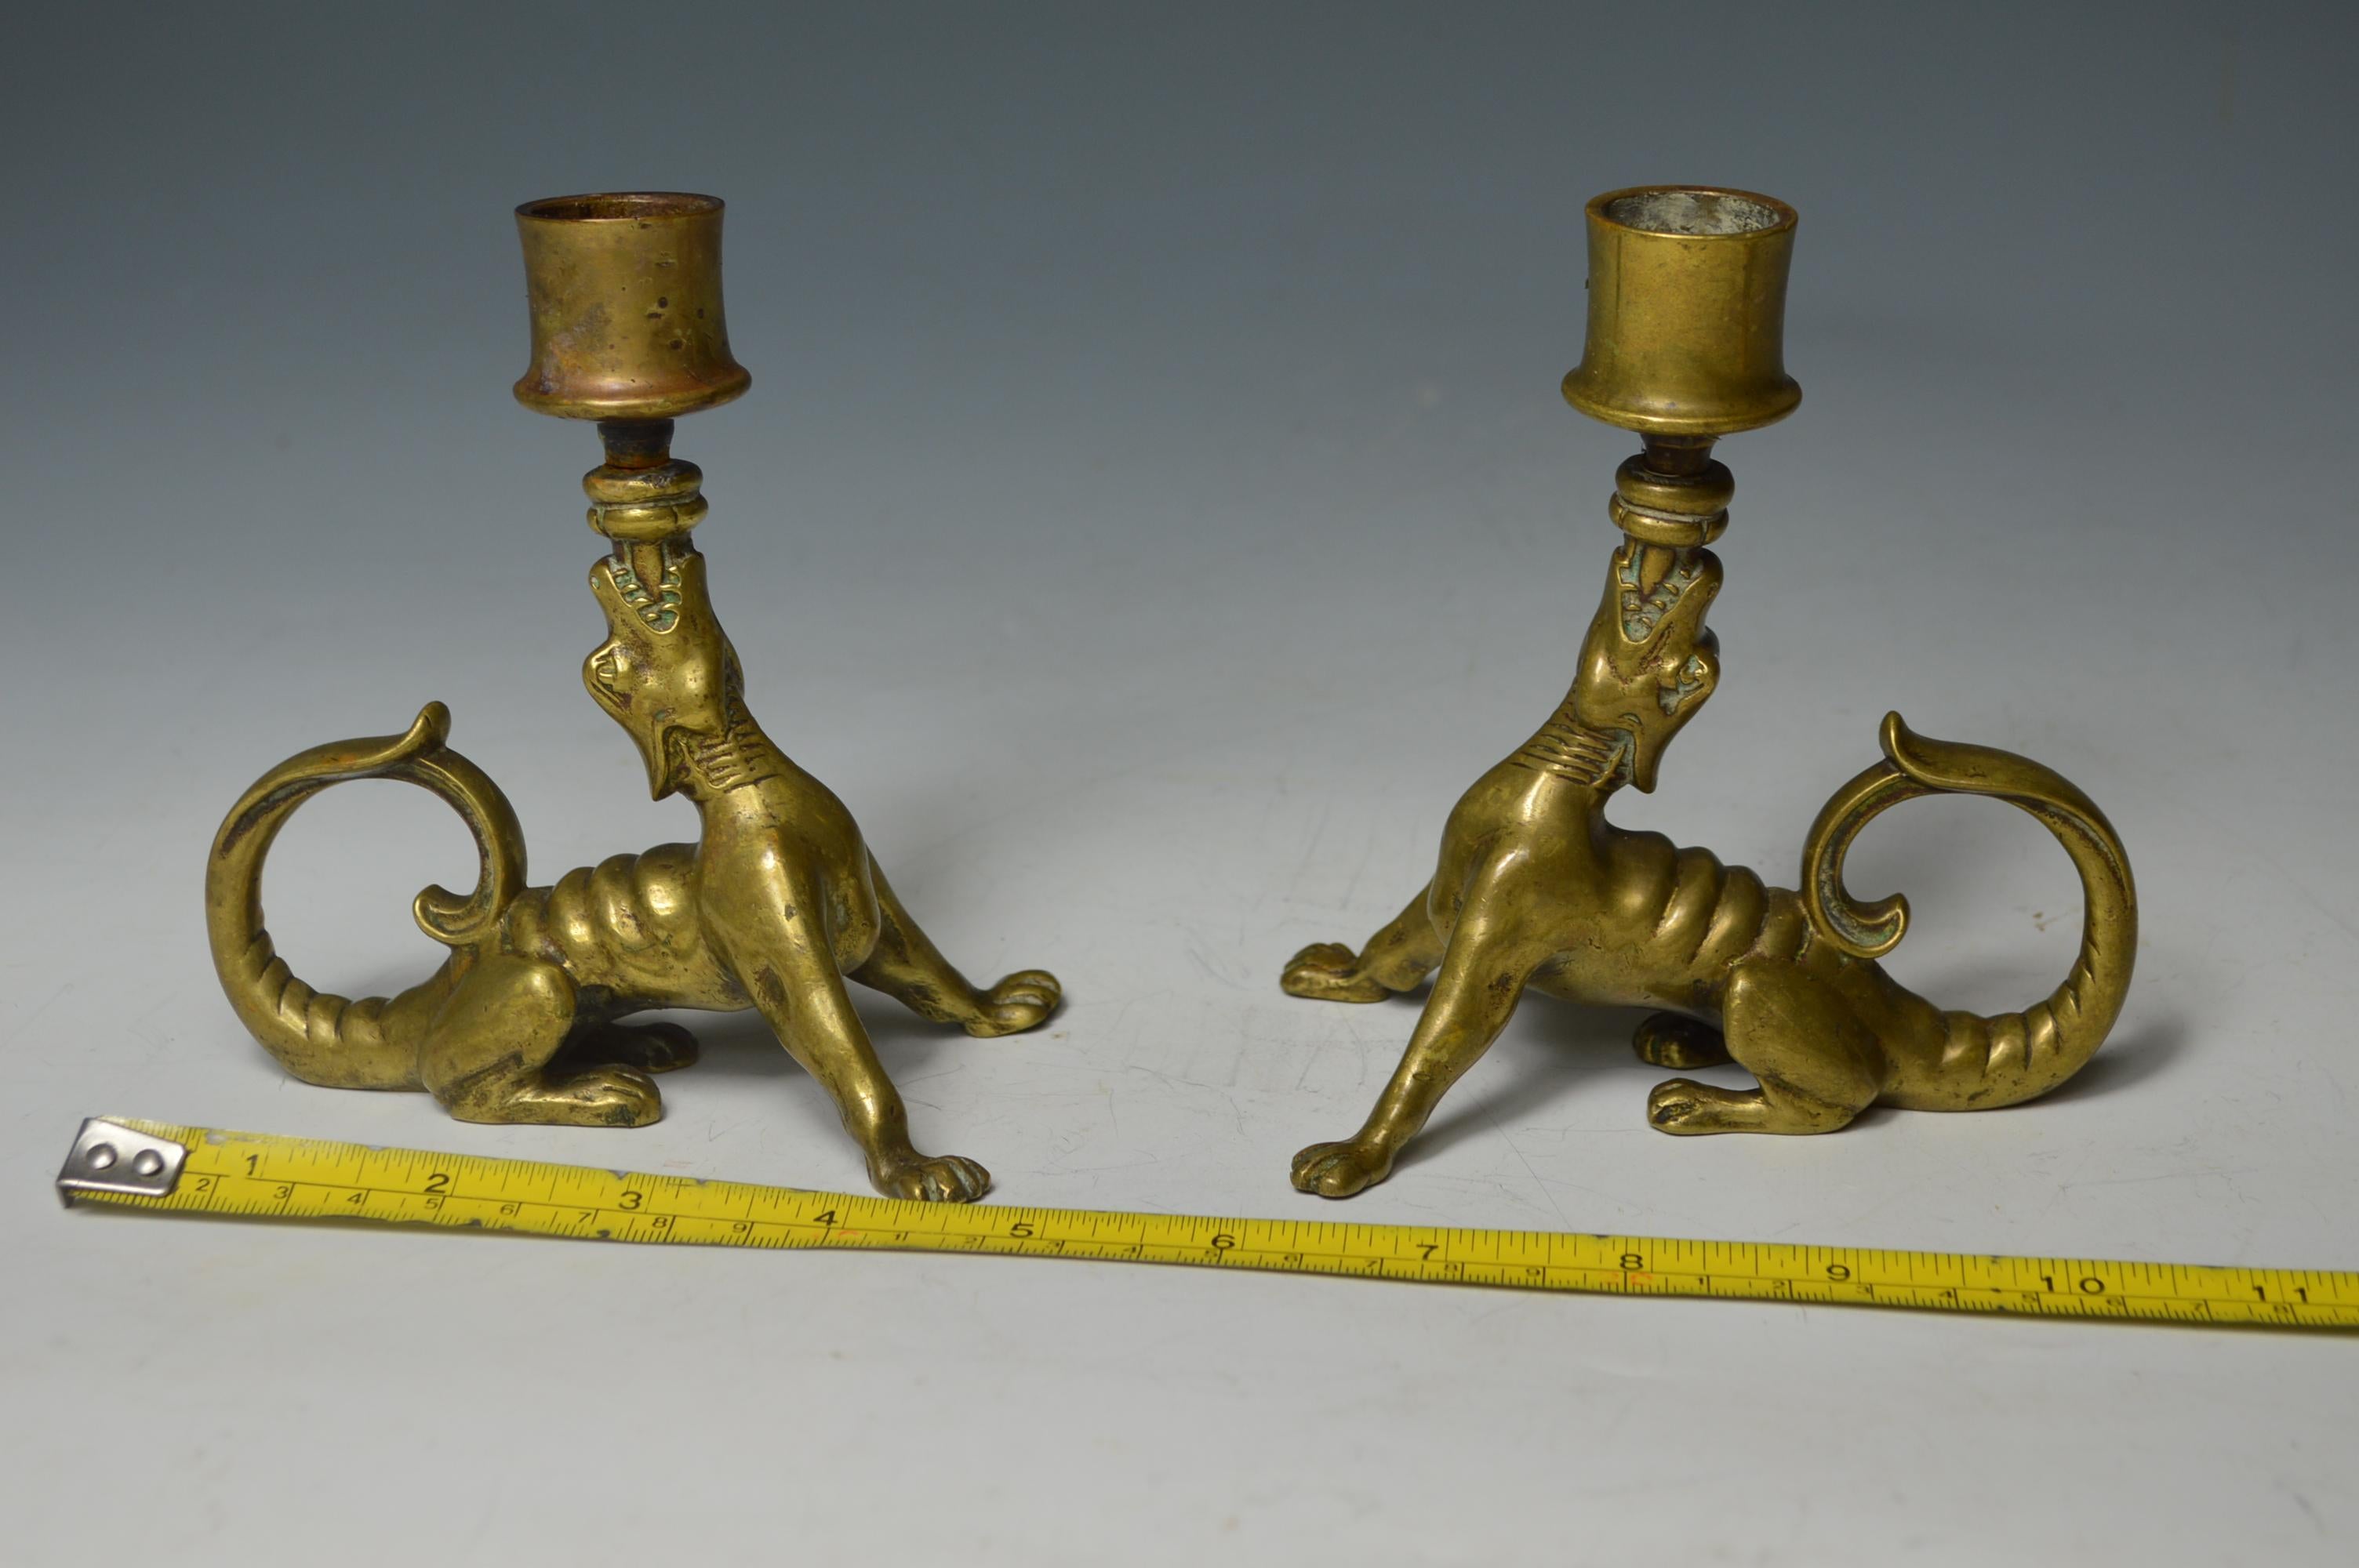 Rare antique Mythological Animal Candle holders 18th Century  interior design  For Sale 2